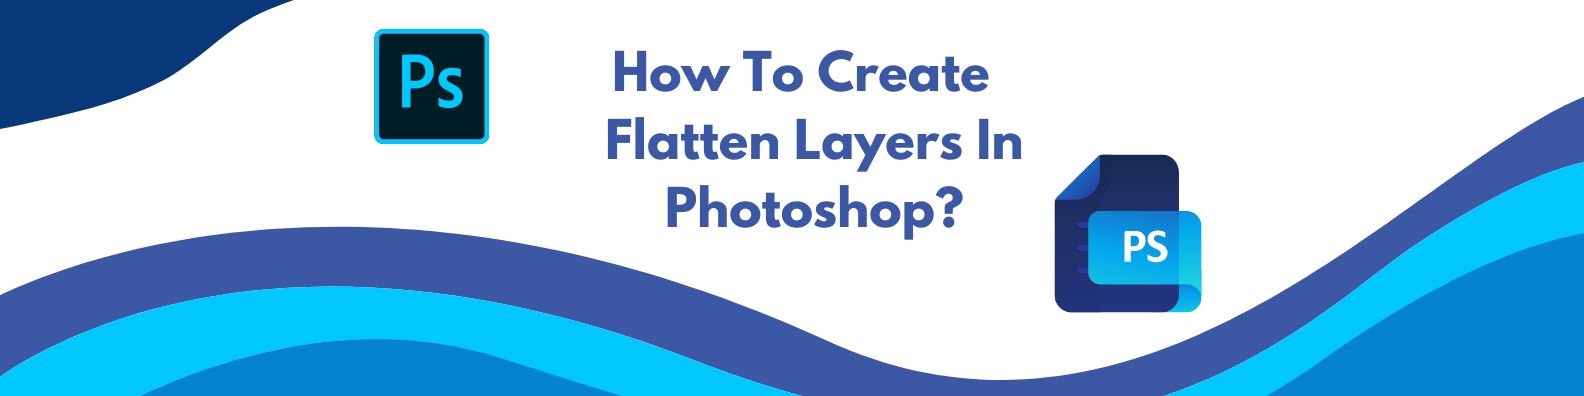 How To Create Flatten Layers In Photoshop